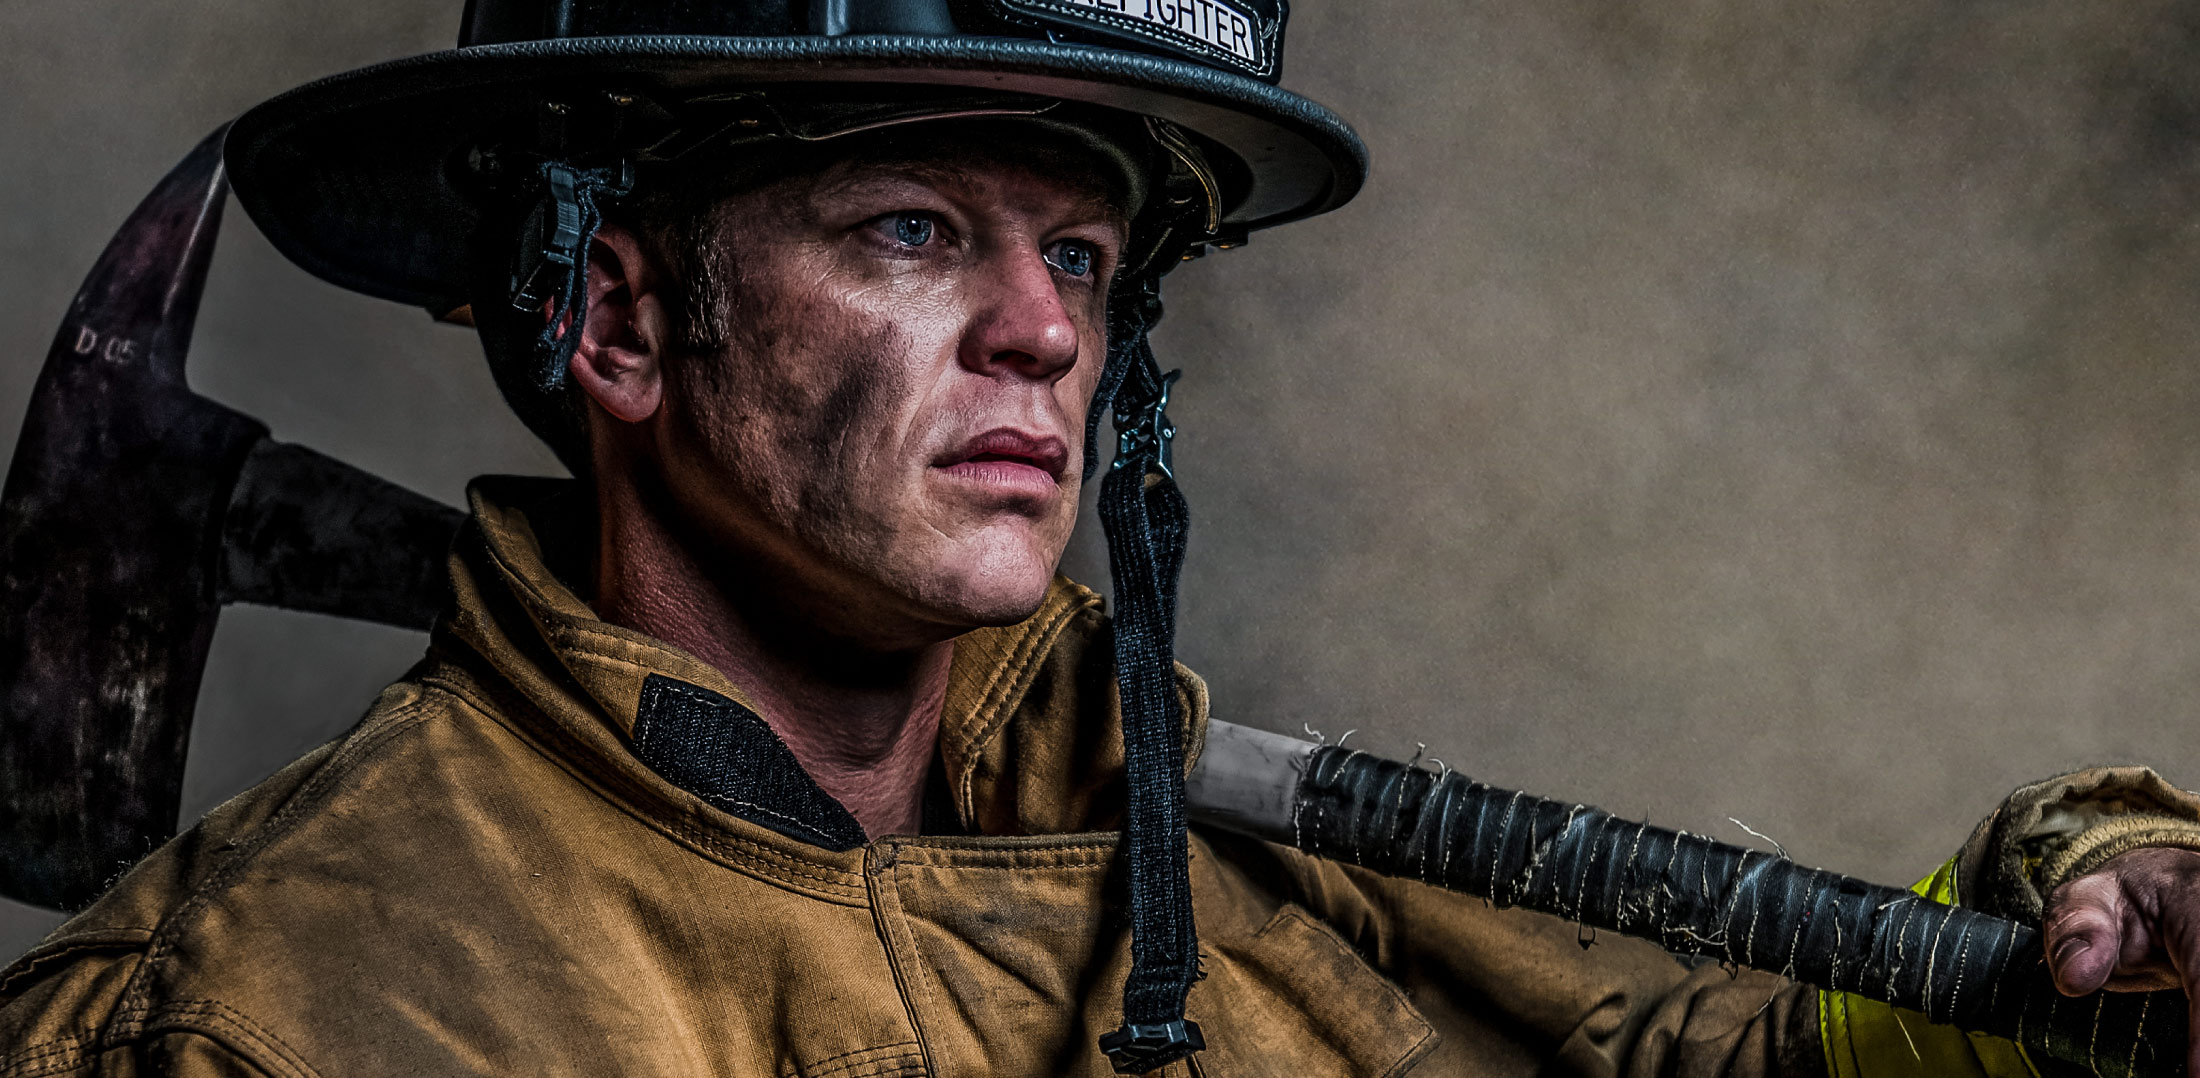 Firefighter portrait zoomed in looking emotional with smoke in the background